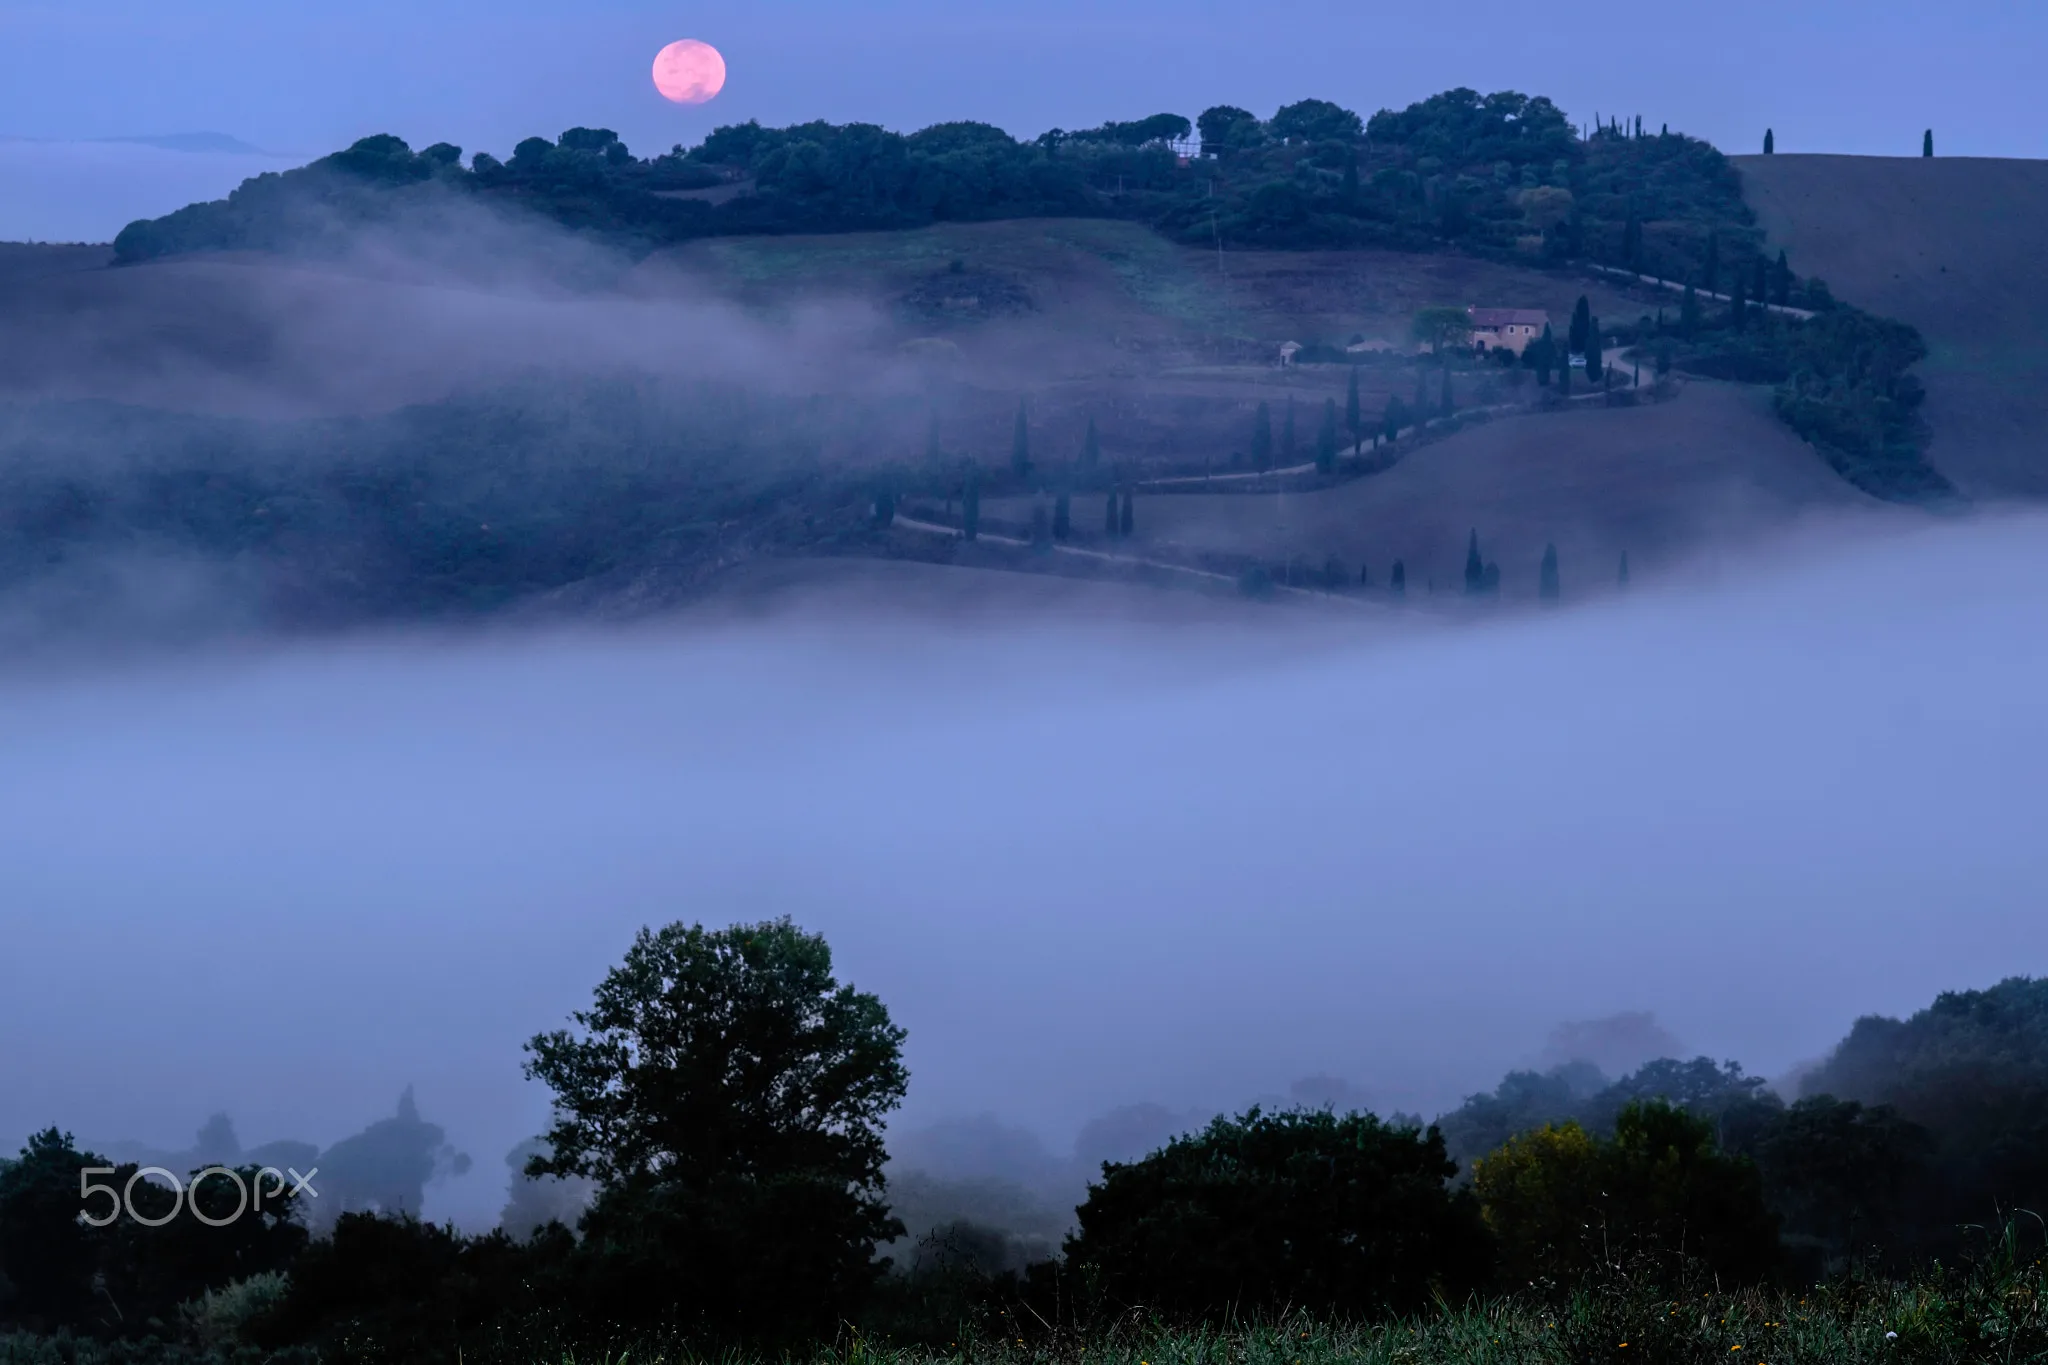 Photo showing: 500px provided description: La Foce [#fog ,#morning ,#travel ,#italy ,#colour ,#moon ,#dawn ,#horizontal ,#tuscany ,#no people ,#Siena ,#Moonset ,#Val d'Orcia ,#La Foce]